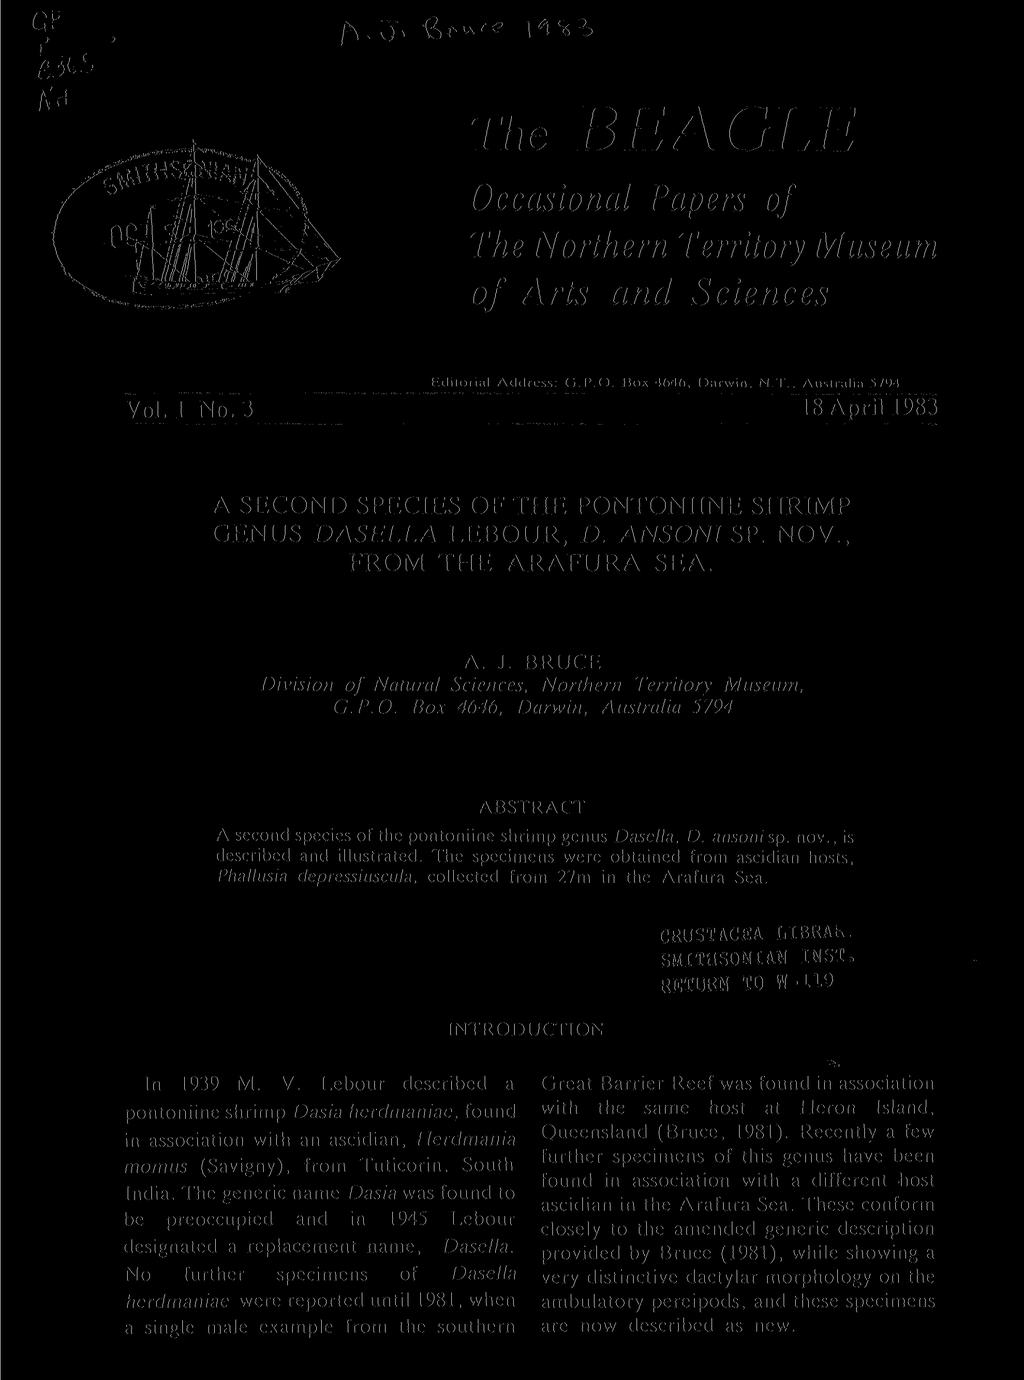 /V 0> The BEAGLE Occasional Papers of The Northern Territory Museum of Arts and Sciences Vol. 1 No. 3 Hditorial Address: Ci.P.O. Box 4(>4(i, Darwin, NT.